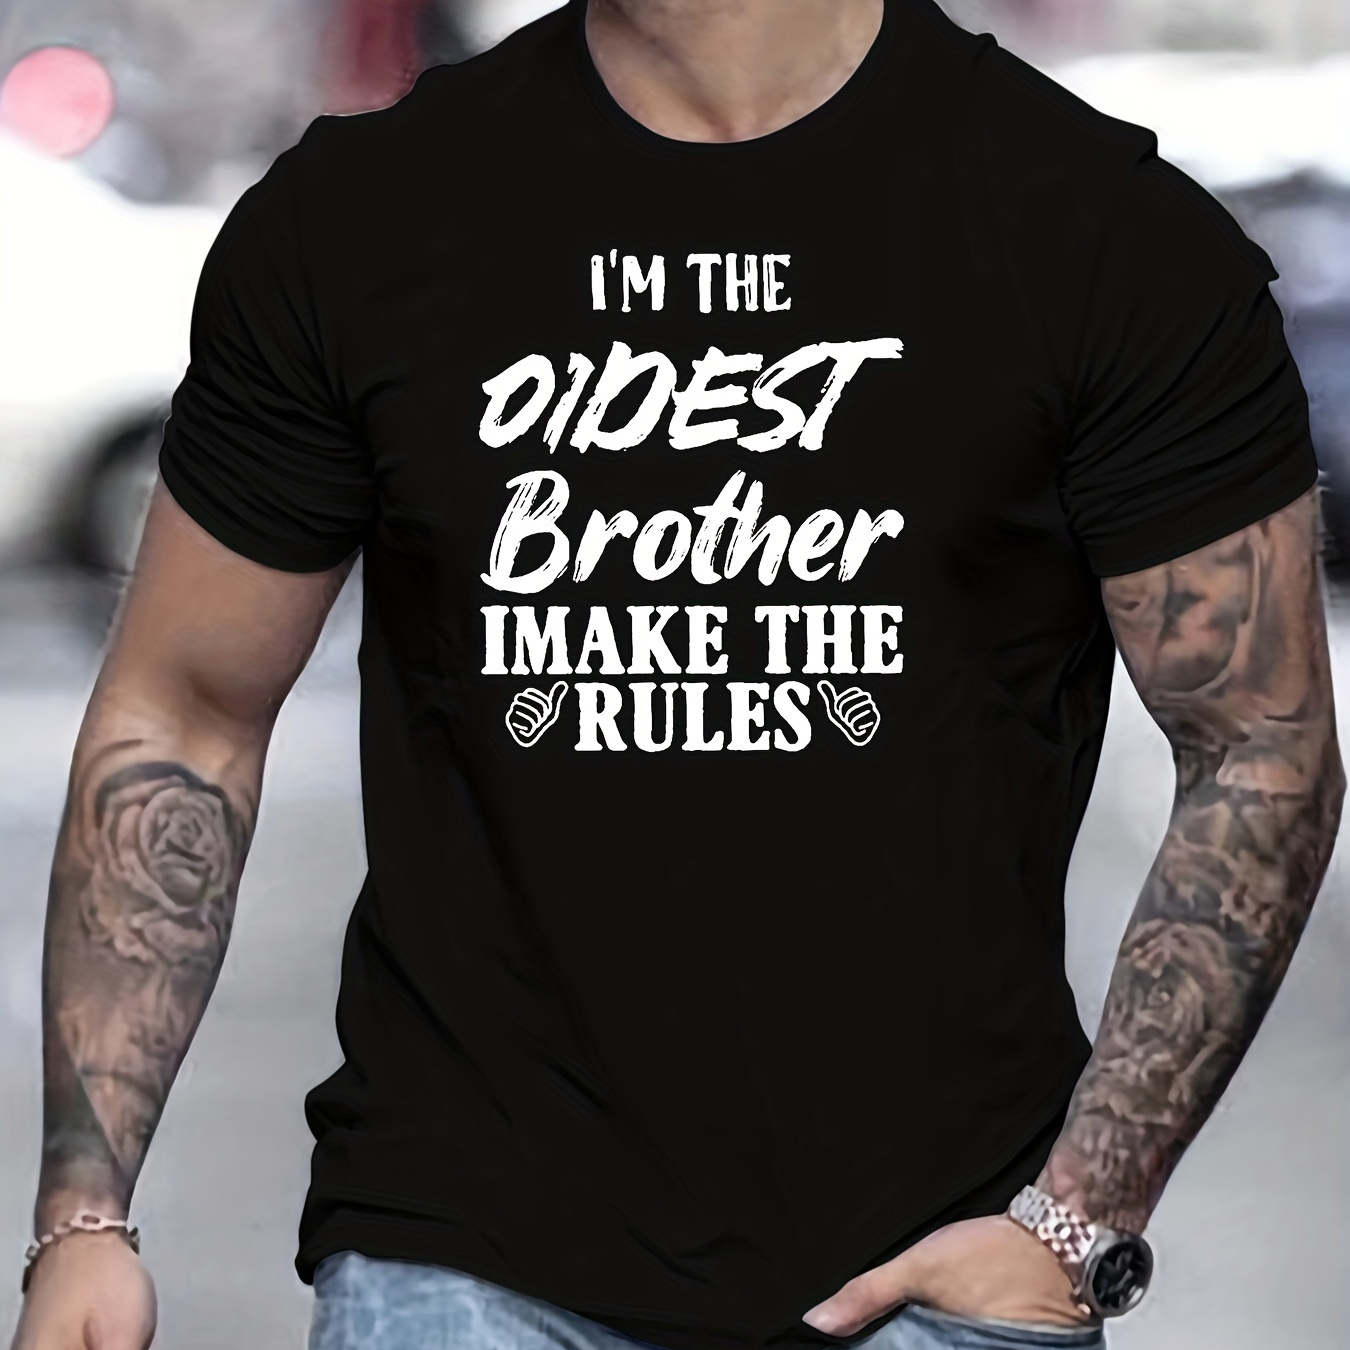 

Oldest Brother Letter Print Men's T-shirt For Summer Outdoor, Retro Male Clothing